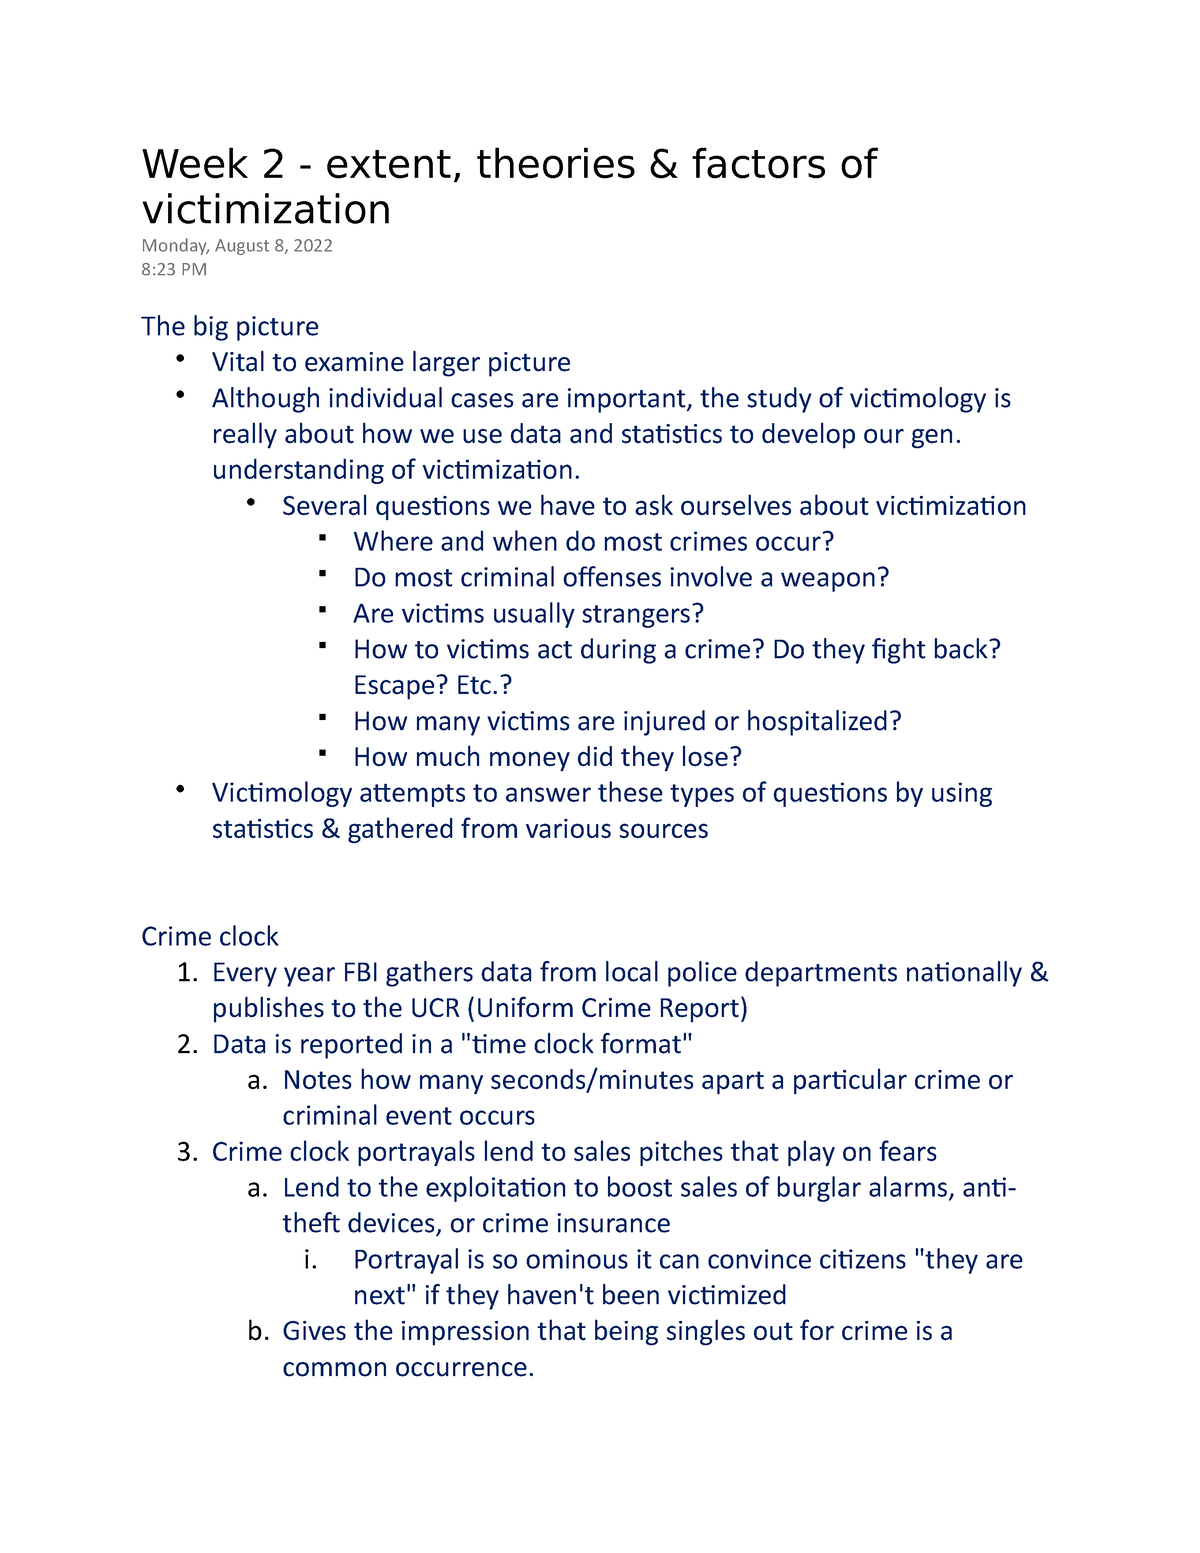 research paper topics for victimology